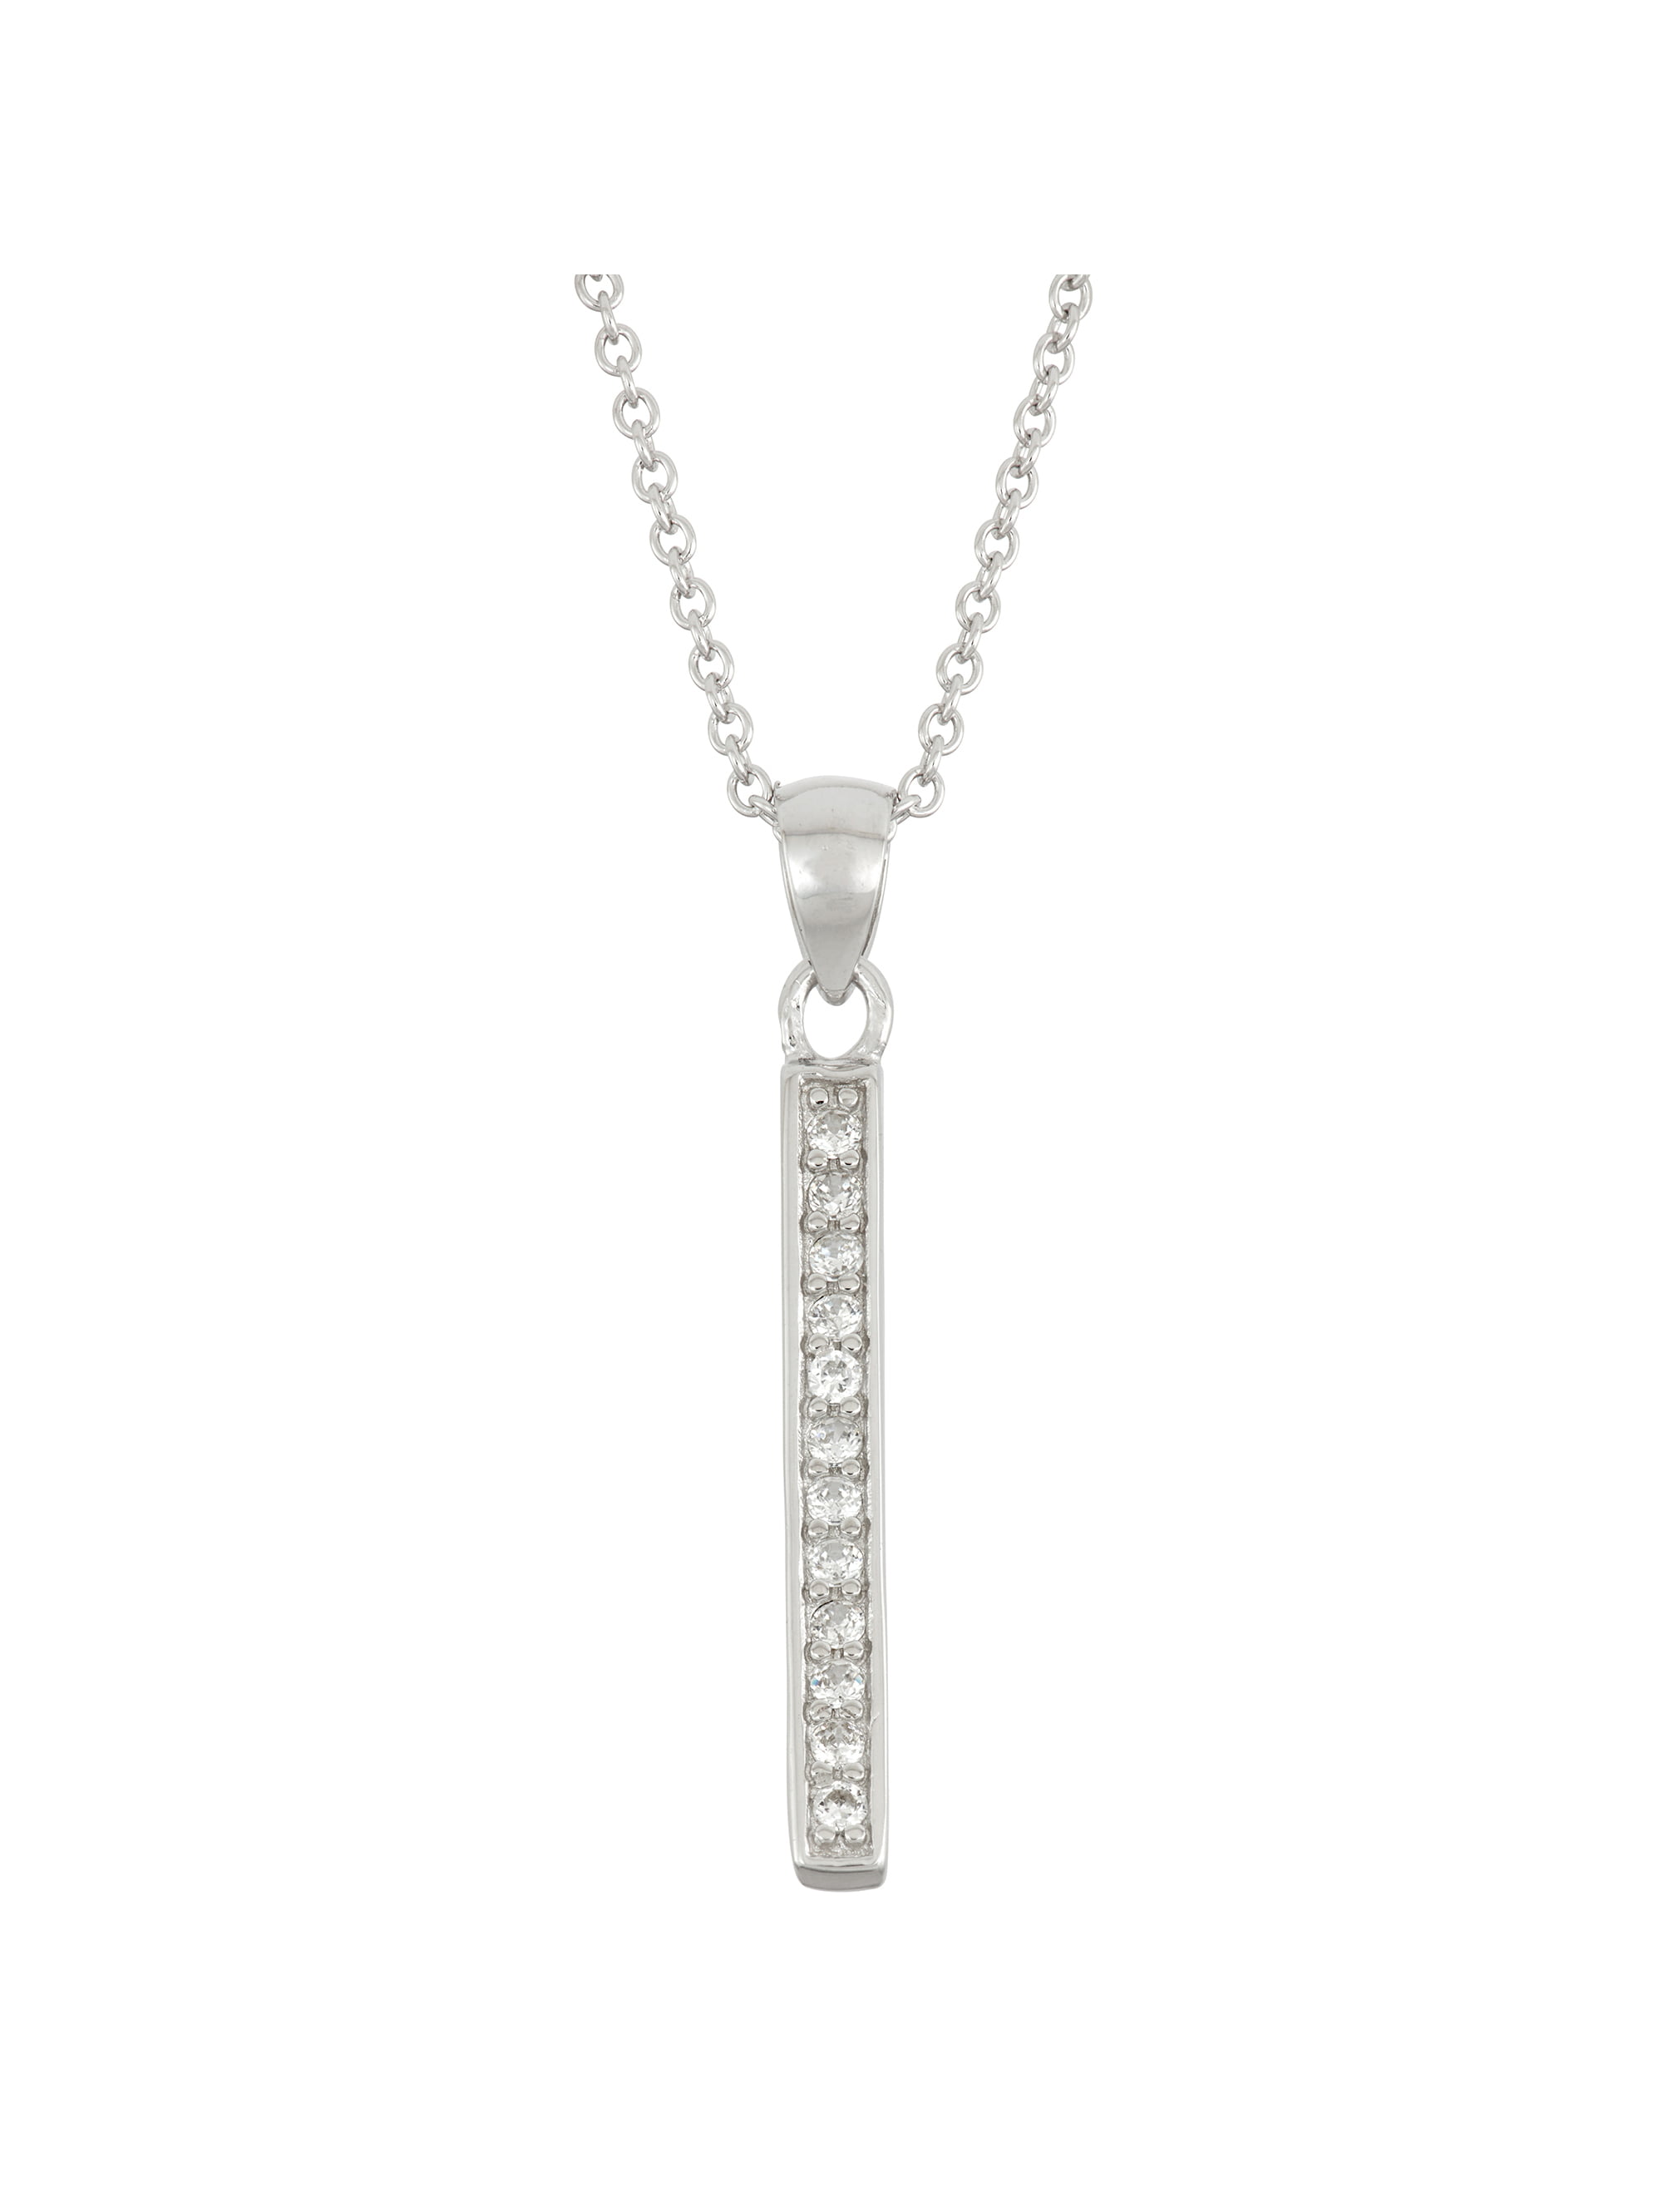 White Cubic Zirconia Sterling Silver Straight Bar Stick Necklace, 18\